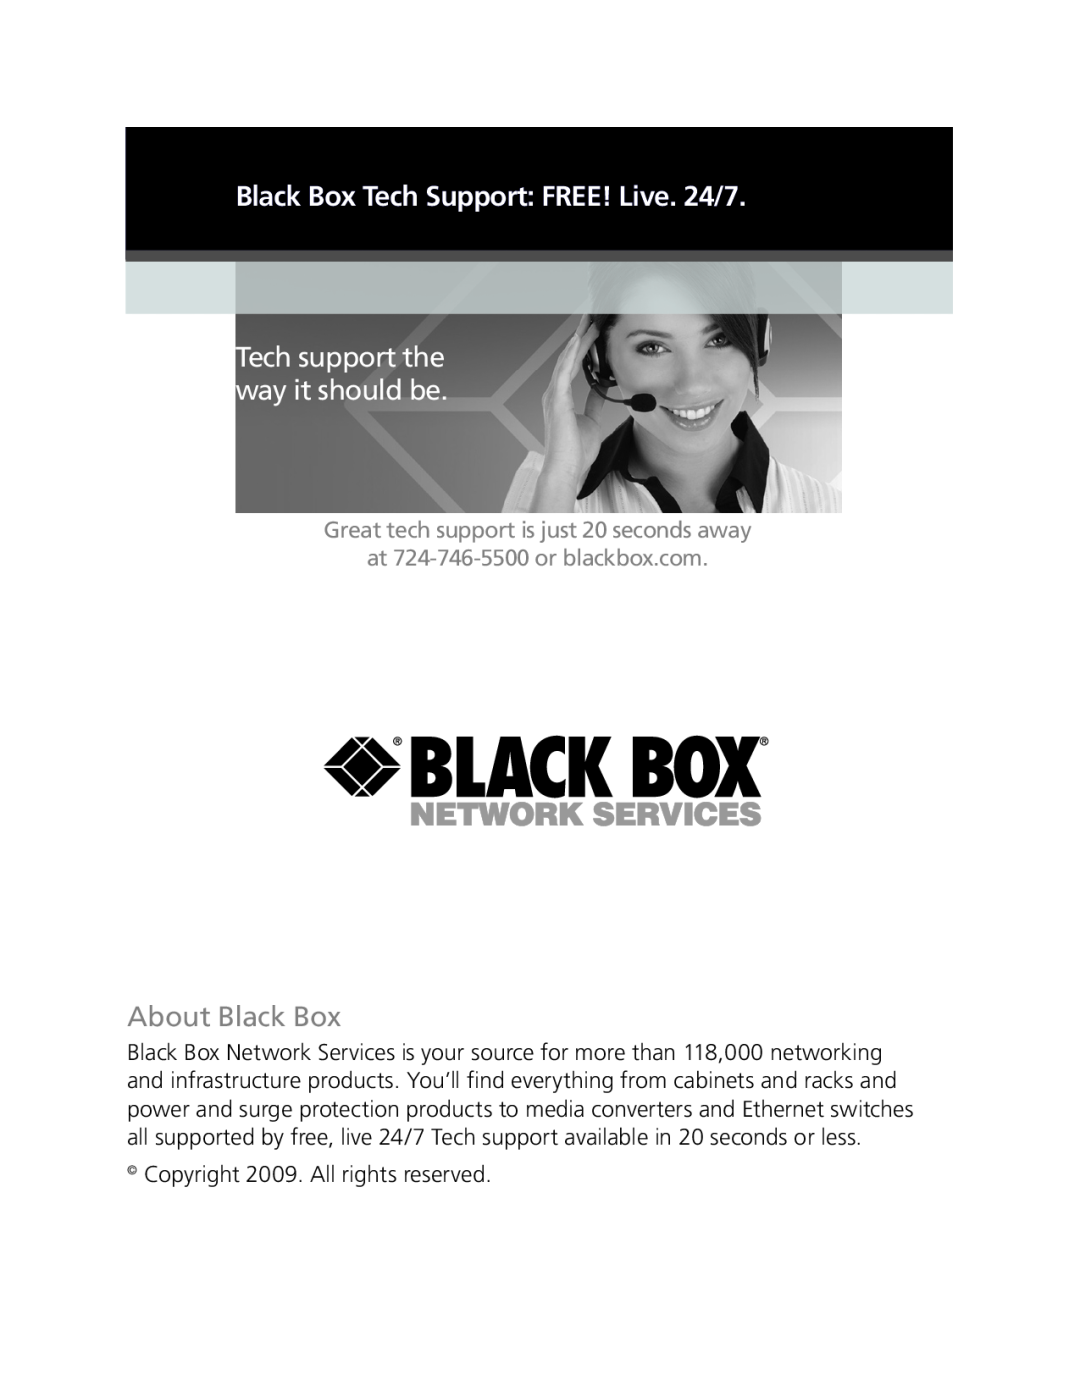 Black Box CLM5000 manual Tech support the way it should be, Black Box Tech Support: FREE! Live. 24/7, About Black Box 